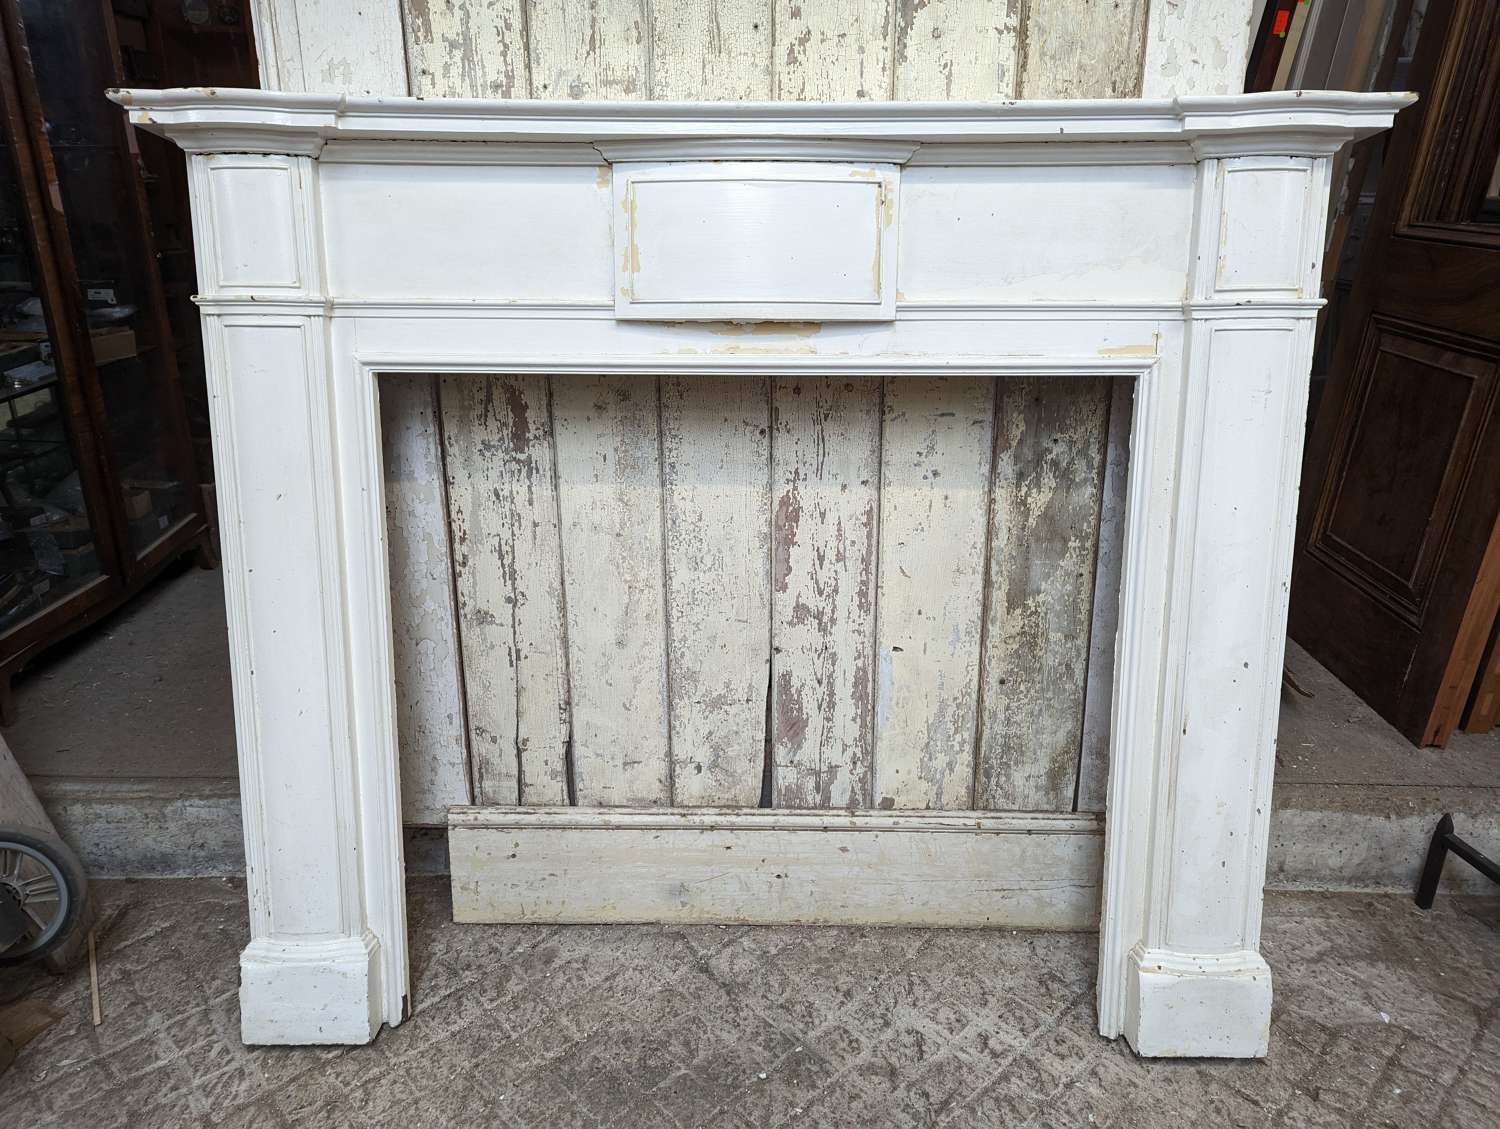 FS0256 A LARGE RECLAIMED EDWARDIAN PAINTED PINE FIRE SURROUND